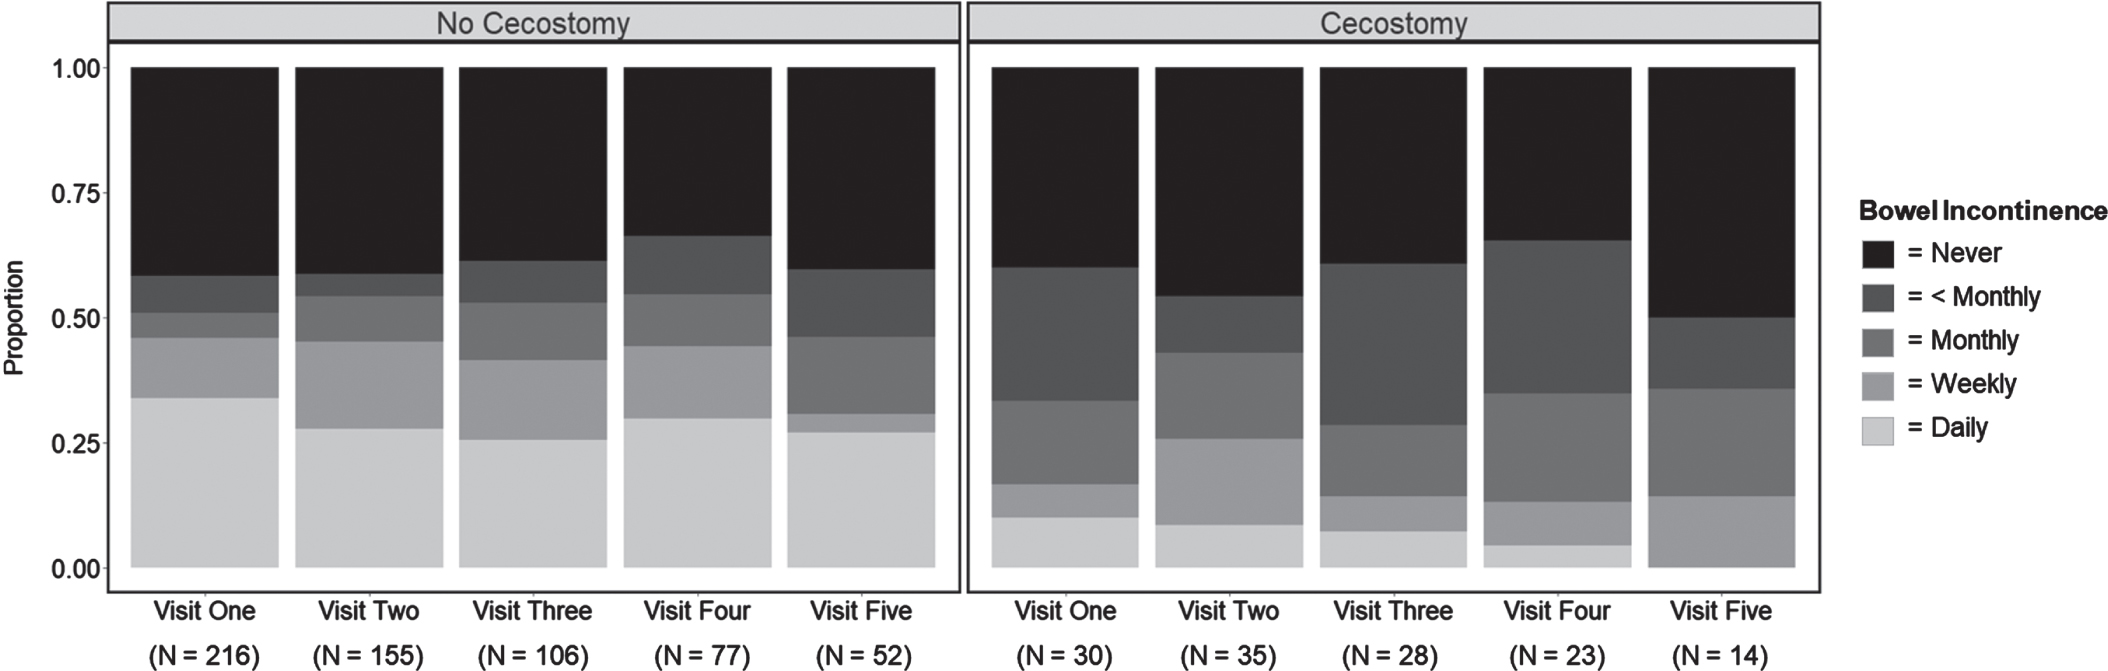 Bowel continence scores by cecostomy status. Note. Stacked bar charts visualizing bowel continence scores across the first five visits delineated by cecostomy status “no cecostomy” (no placement) vs “cecostomy” (placement). “N” refers to the number of visits (participants) during each timepoint. For patients who received placements during the study period, visits prior to their placement were labeled as “no cecostomy” (no placement) while visits after their placement were labeled as “cecostomy” (placement).